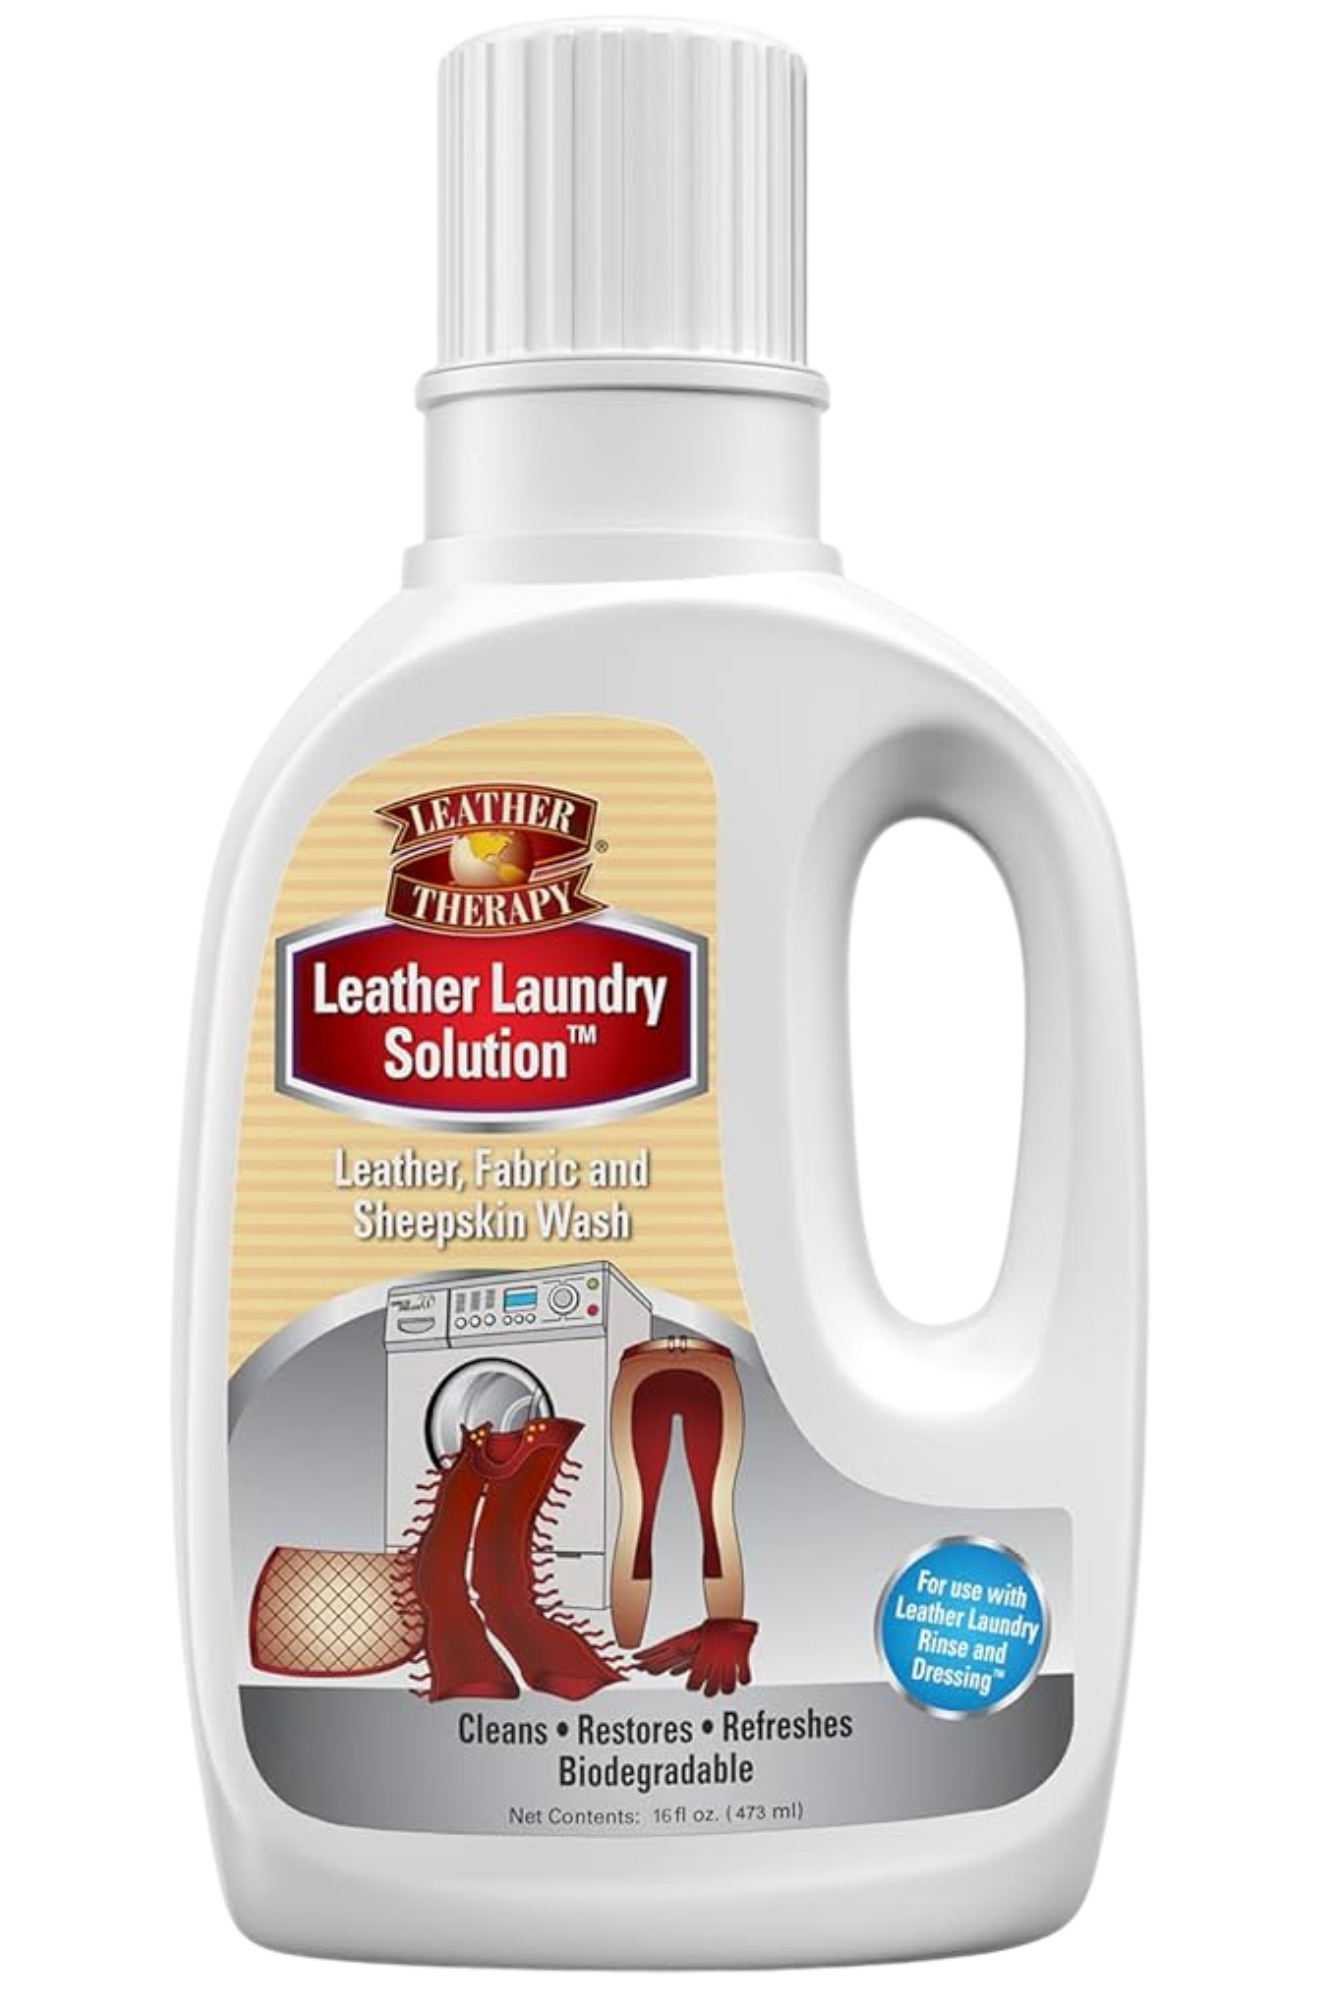 LEATHER THERAPY LAUNDRY SOLUTION